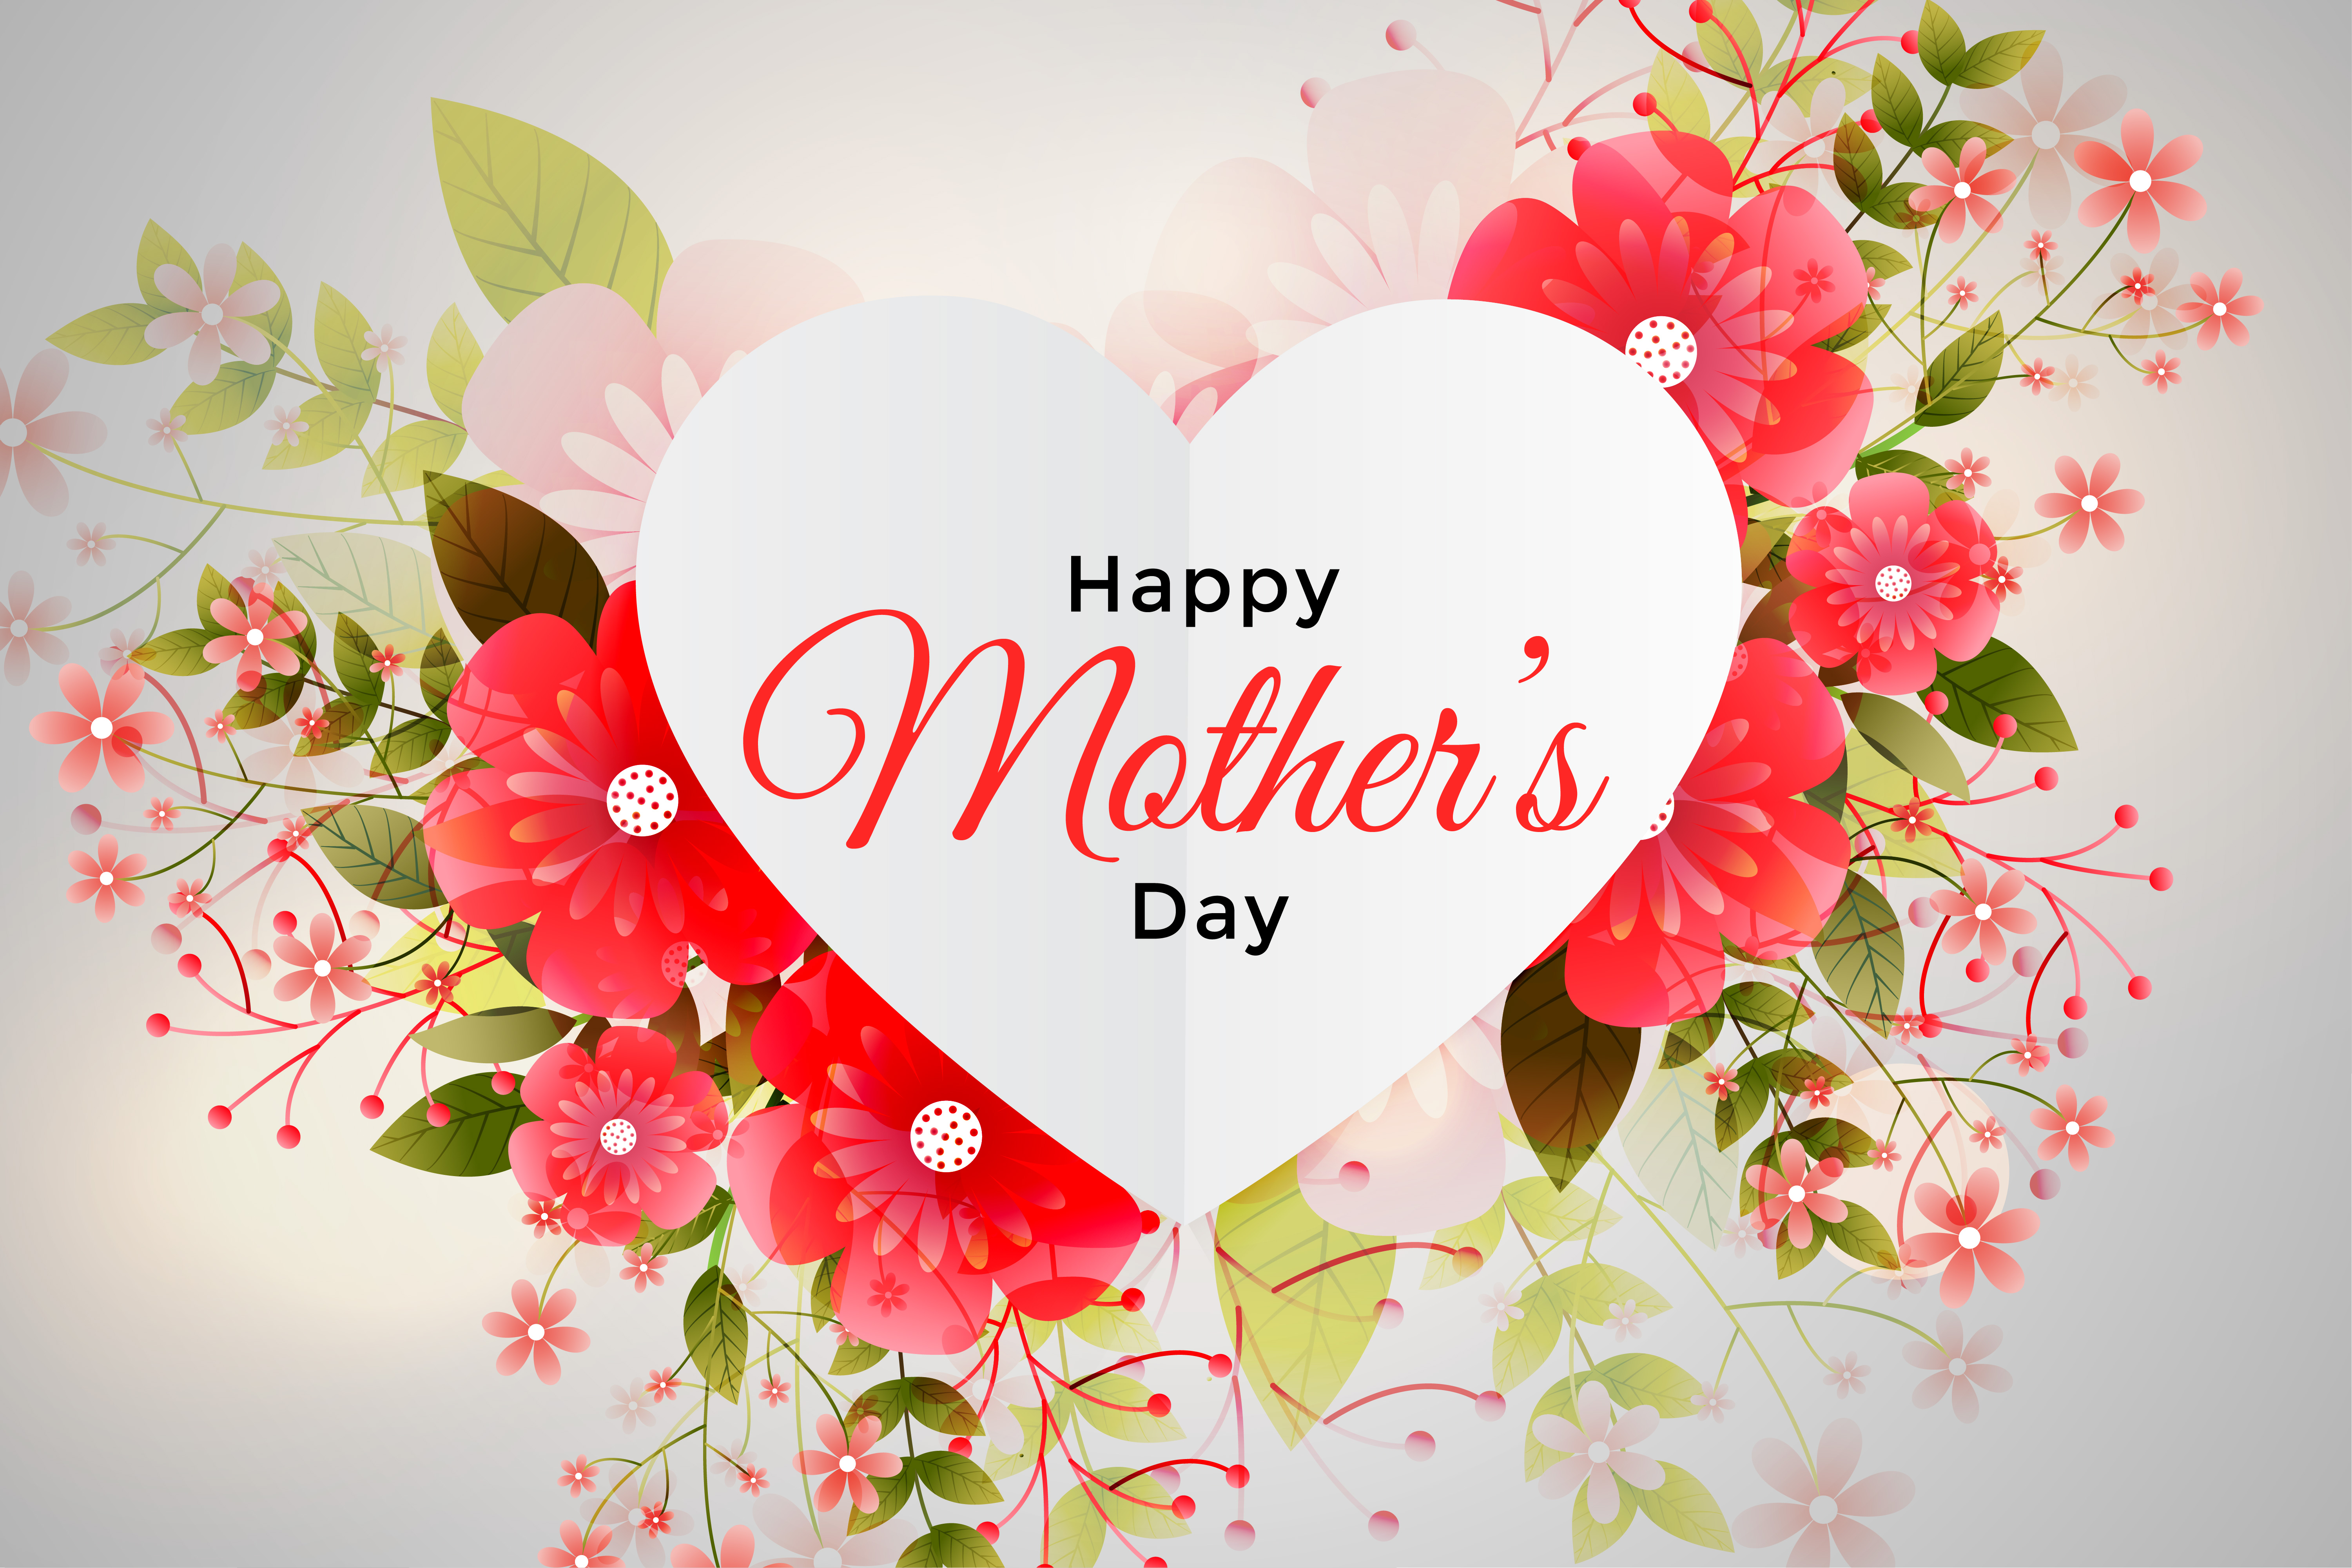 foliage decoration for happy mother's day